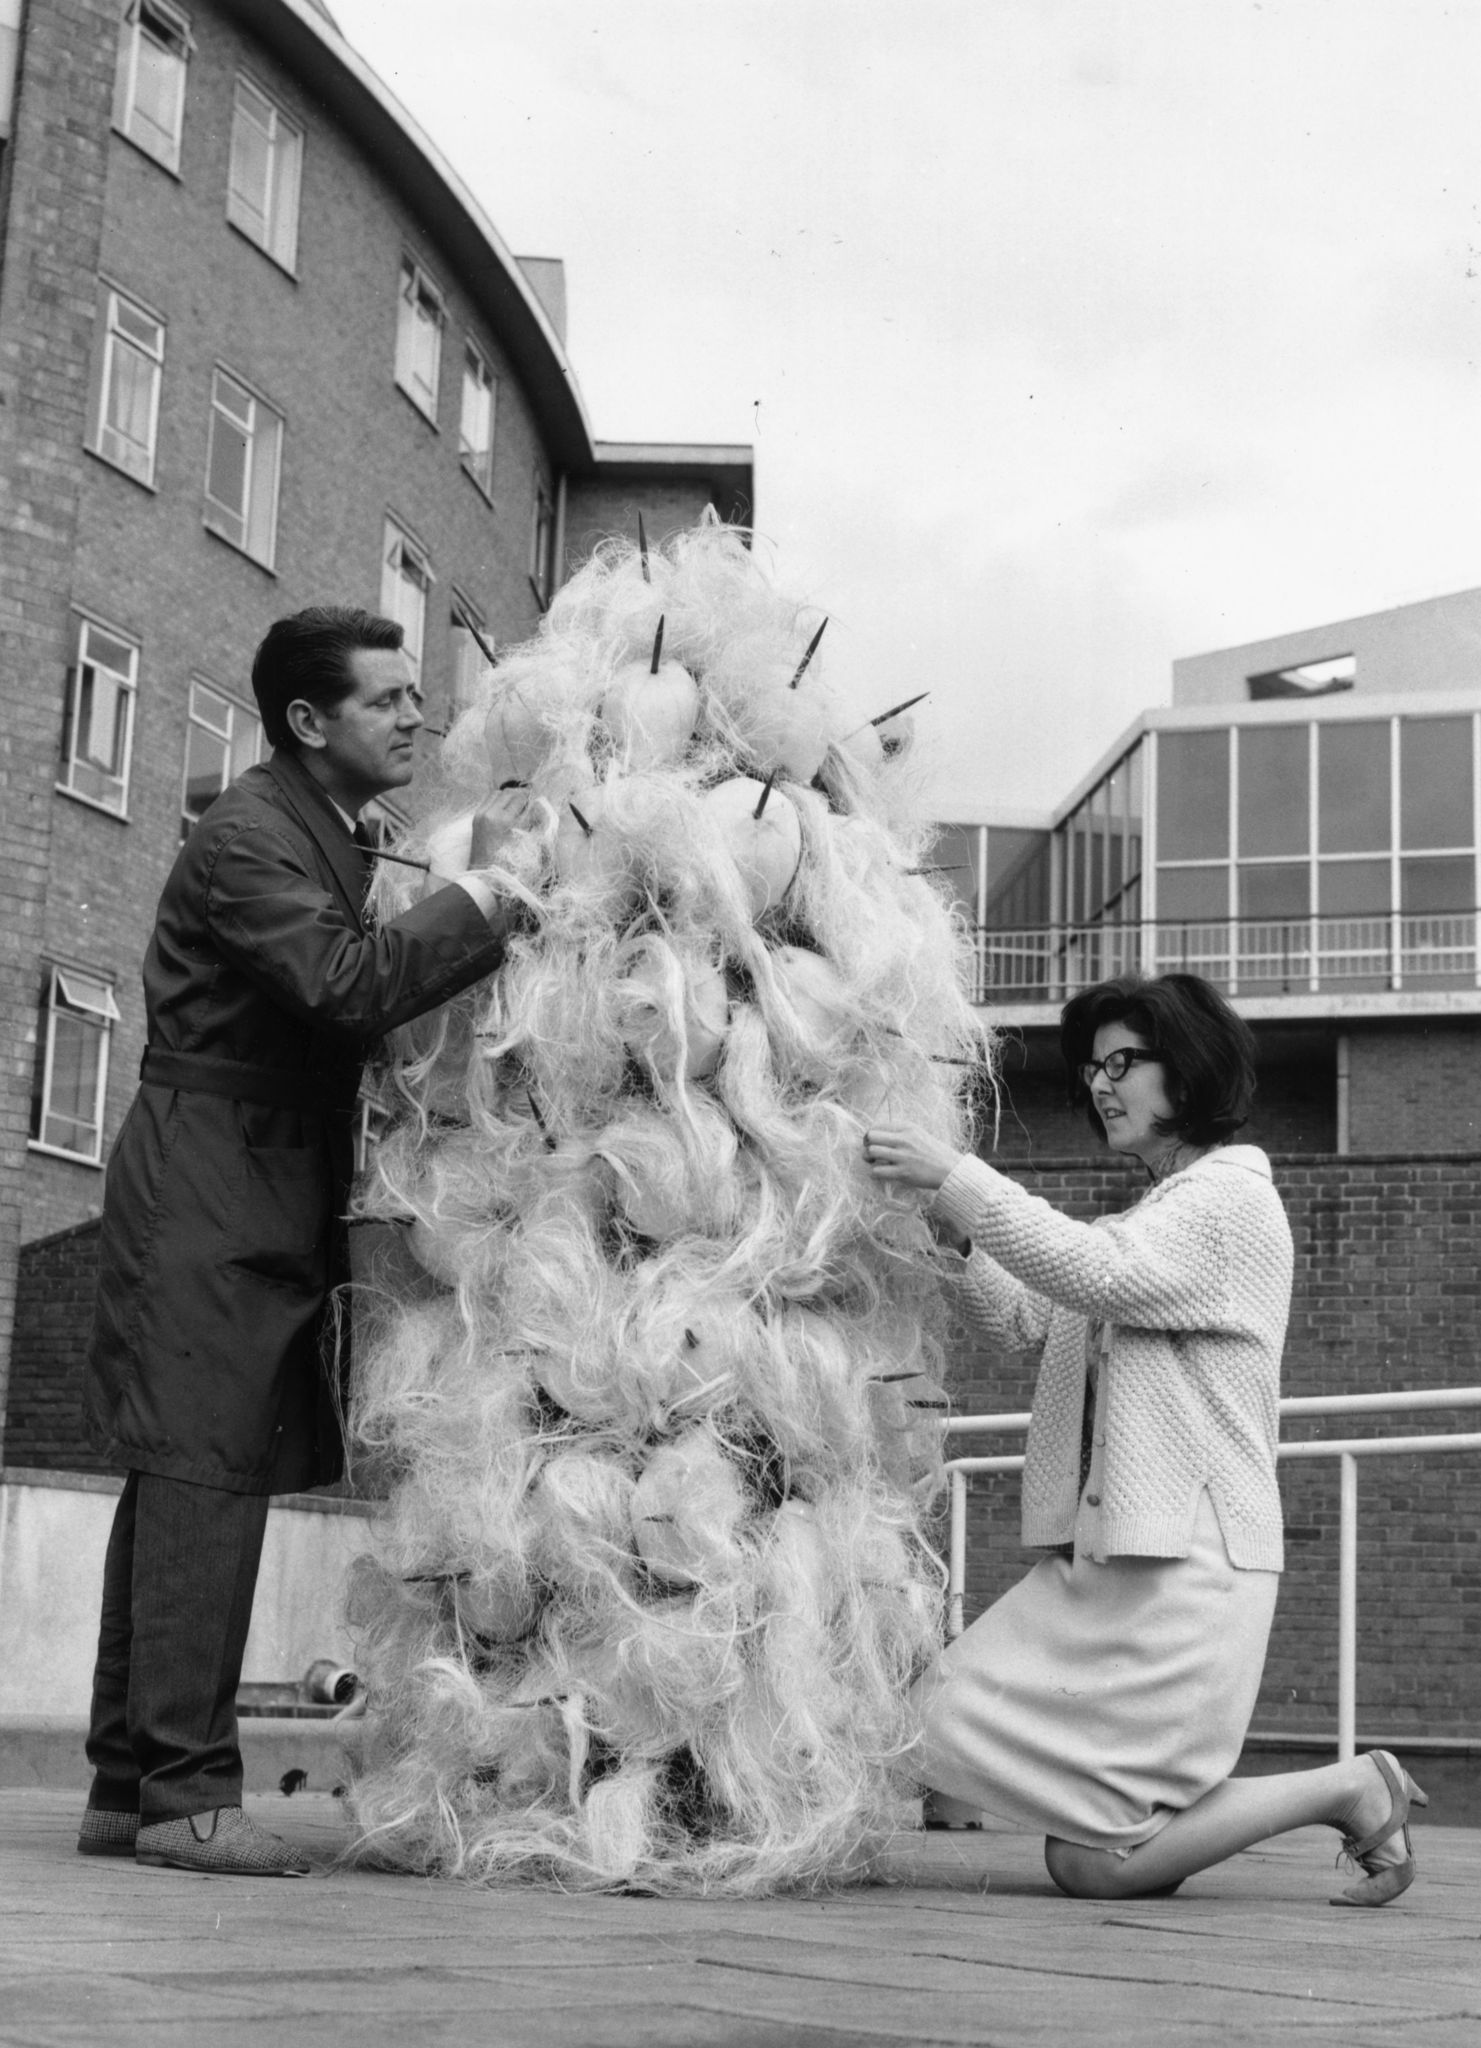 5th August 1965: Daphne Dare, who designs all the Dr Who costumes, with her latest creation, a Varga. Assisting is John Athins of the BBC wardrobe Dept.